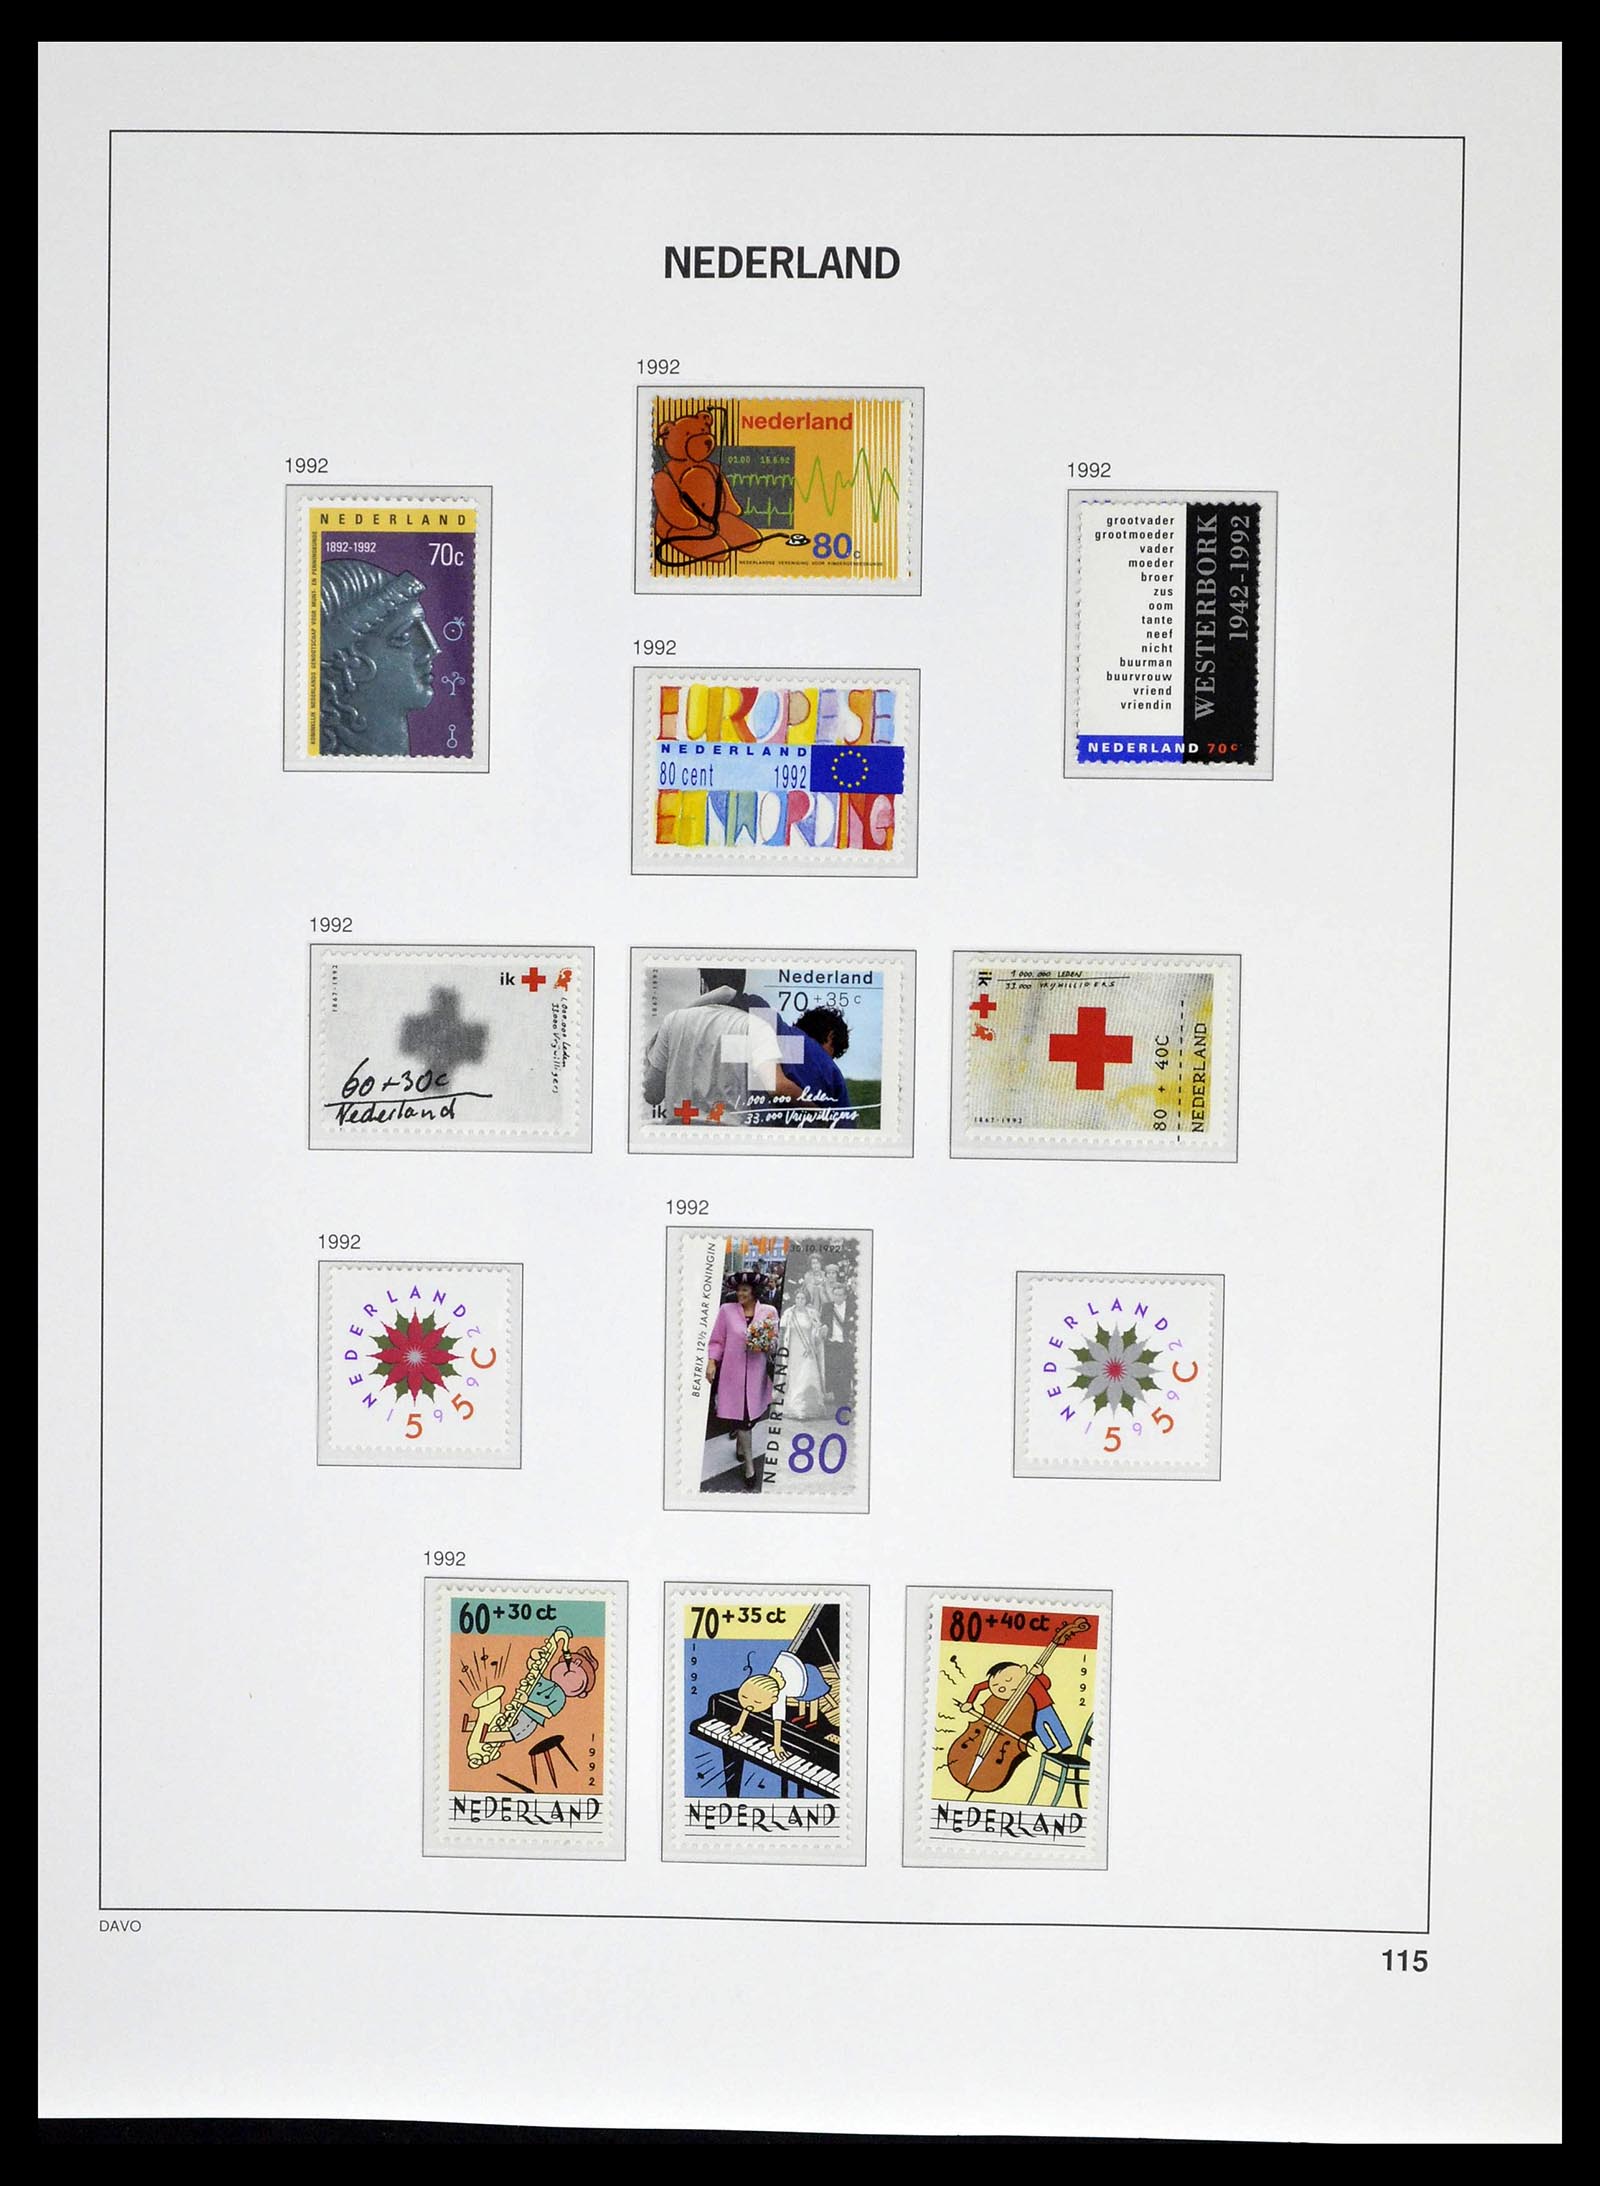 39136 0054 - Stamp collection 39136 Netherlands 1975-2020!